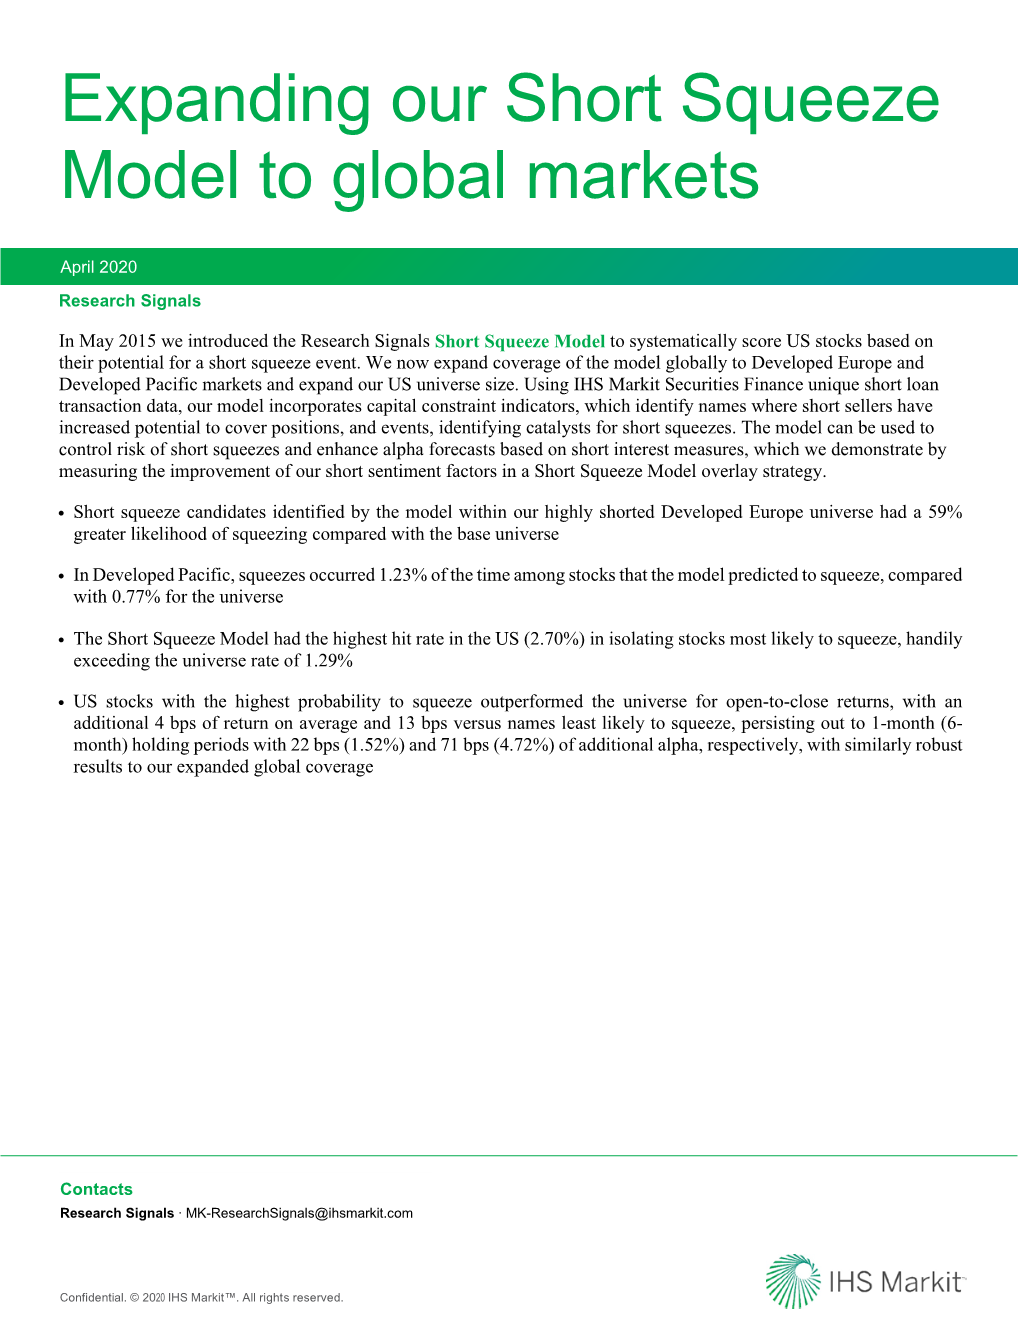 Expanding Our Short Squeeze Model to Global Markets